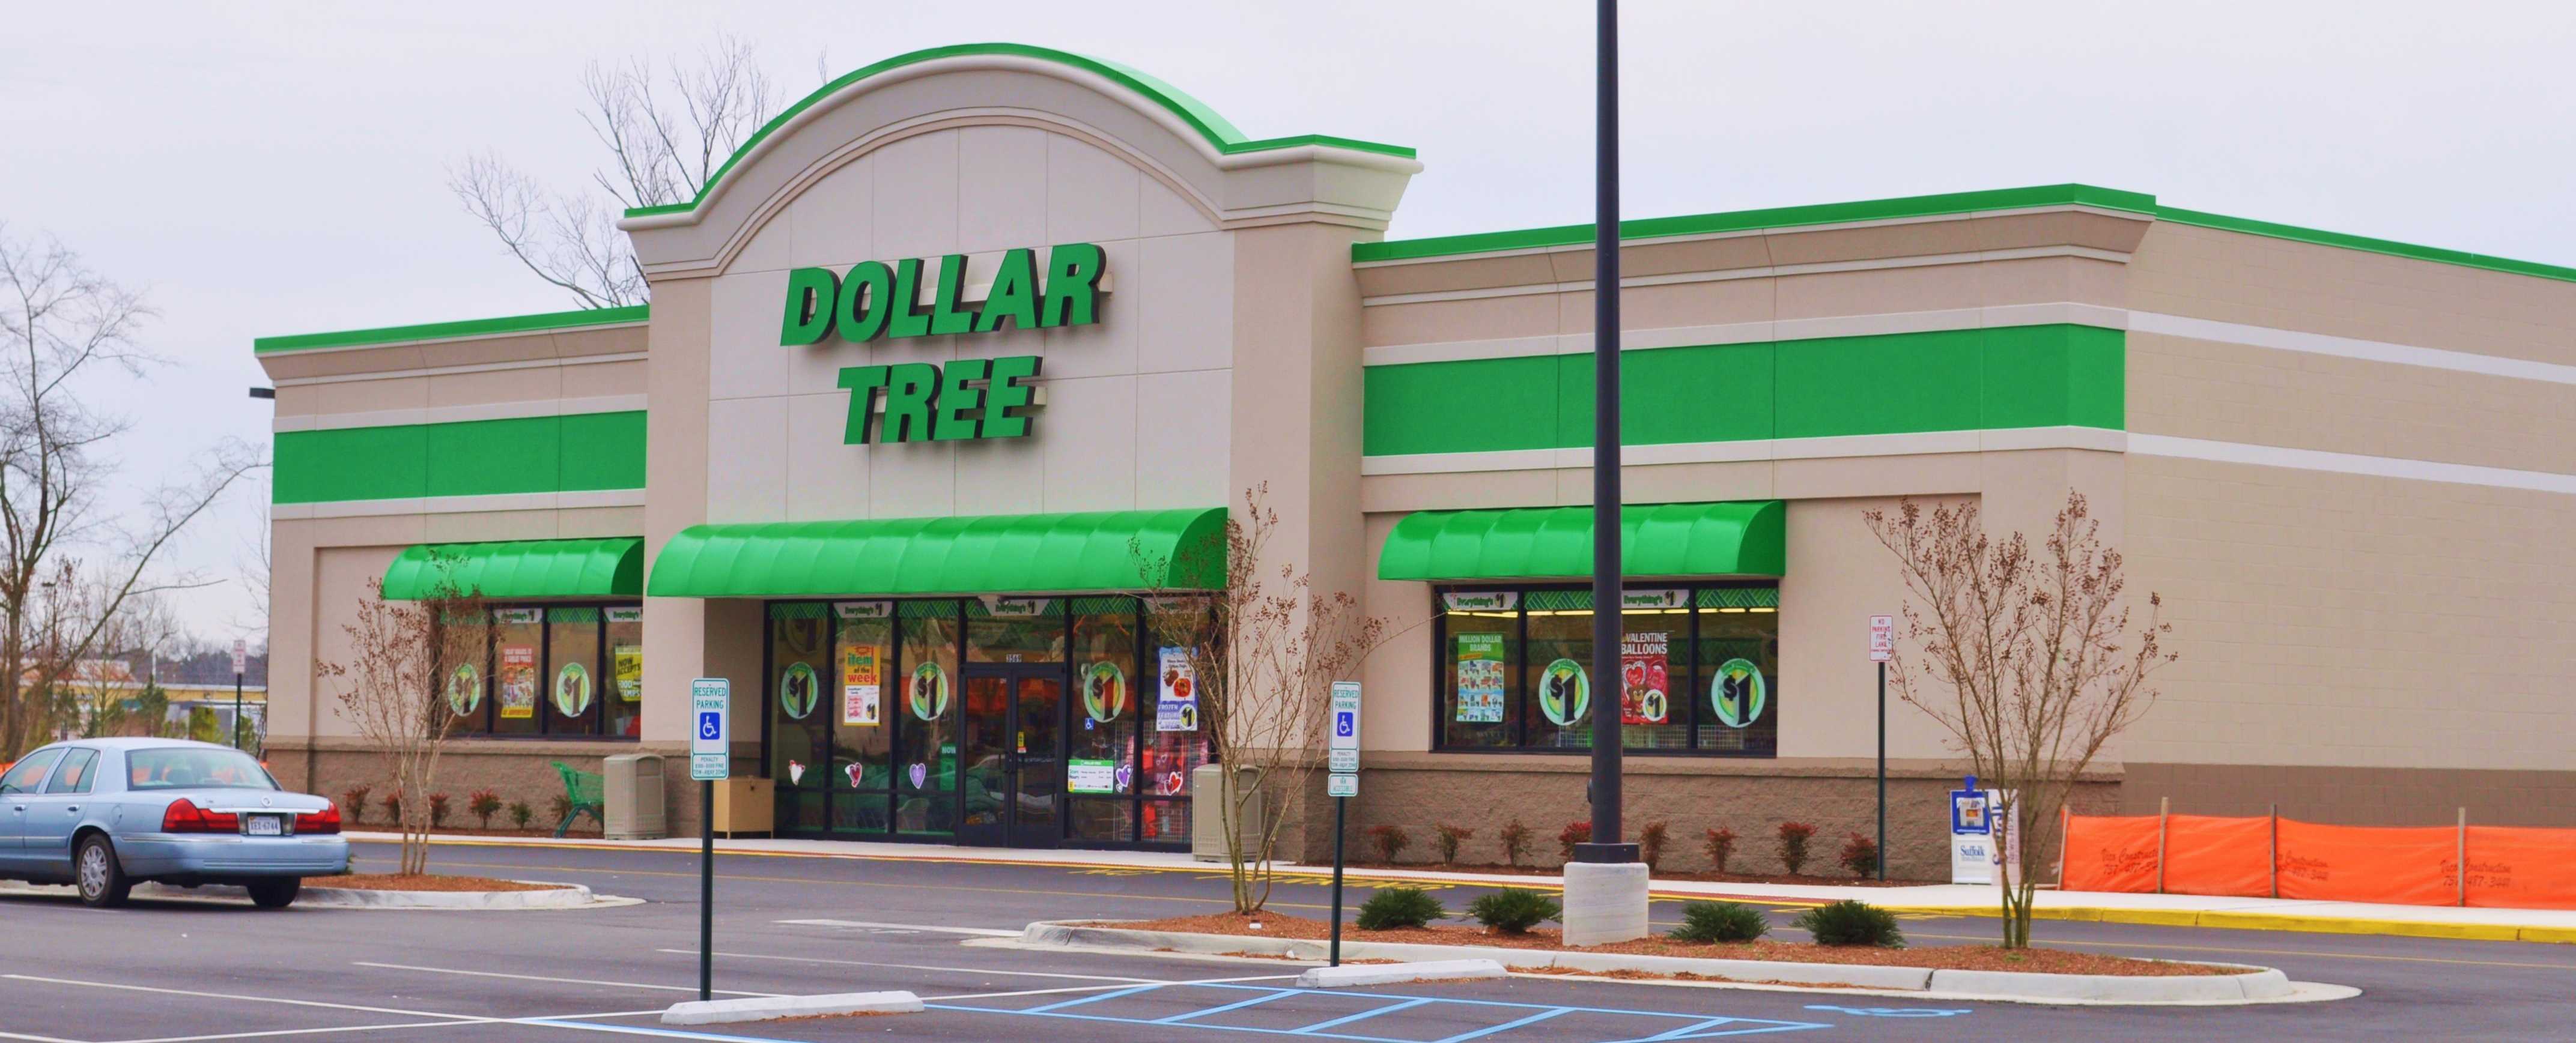 Dollar Tree Holiday Hours Opening/Closing in 2017 | United States Maps